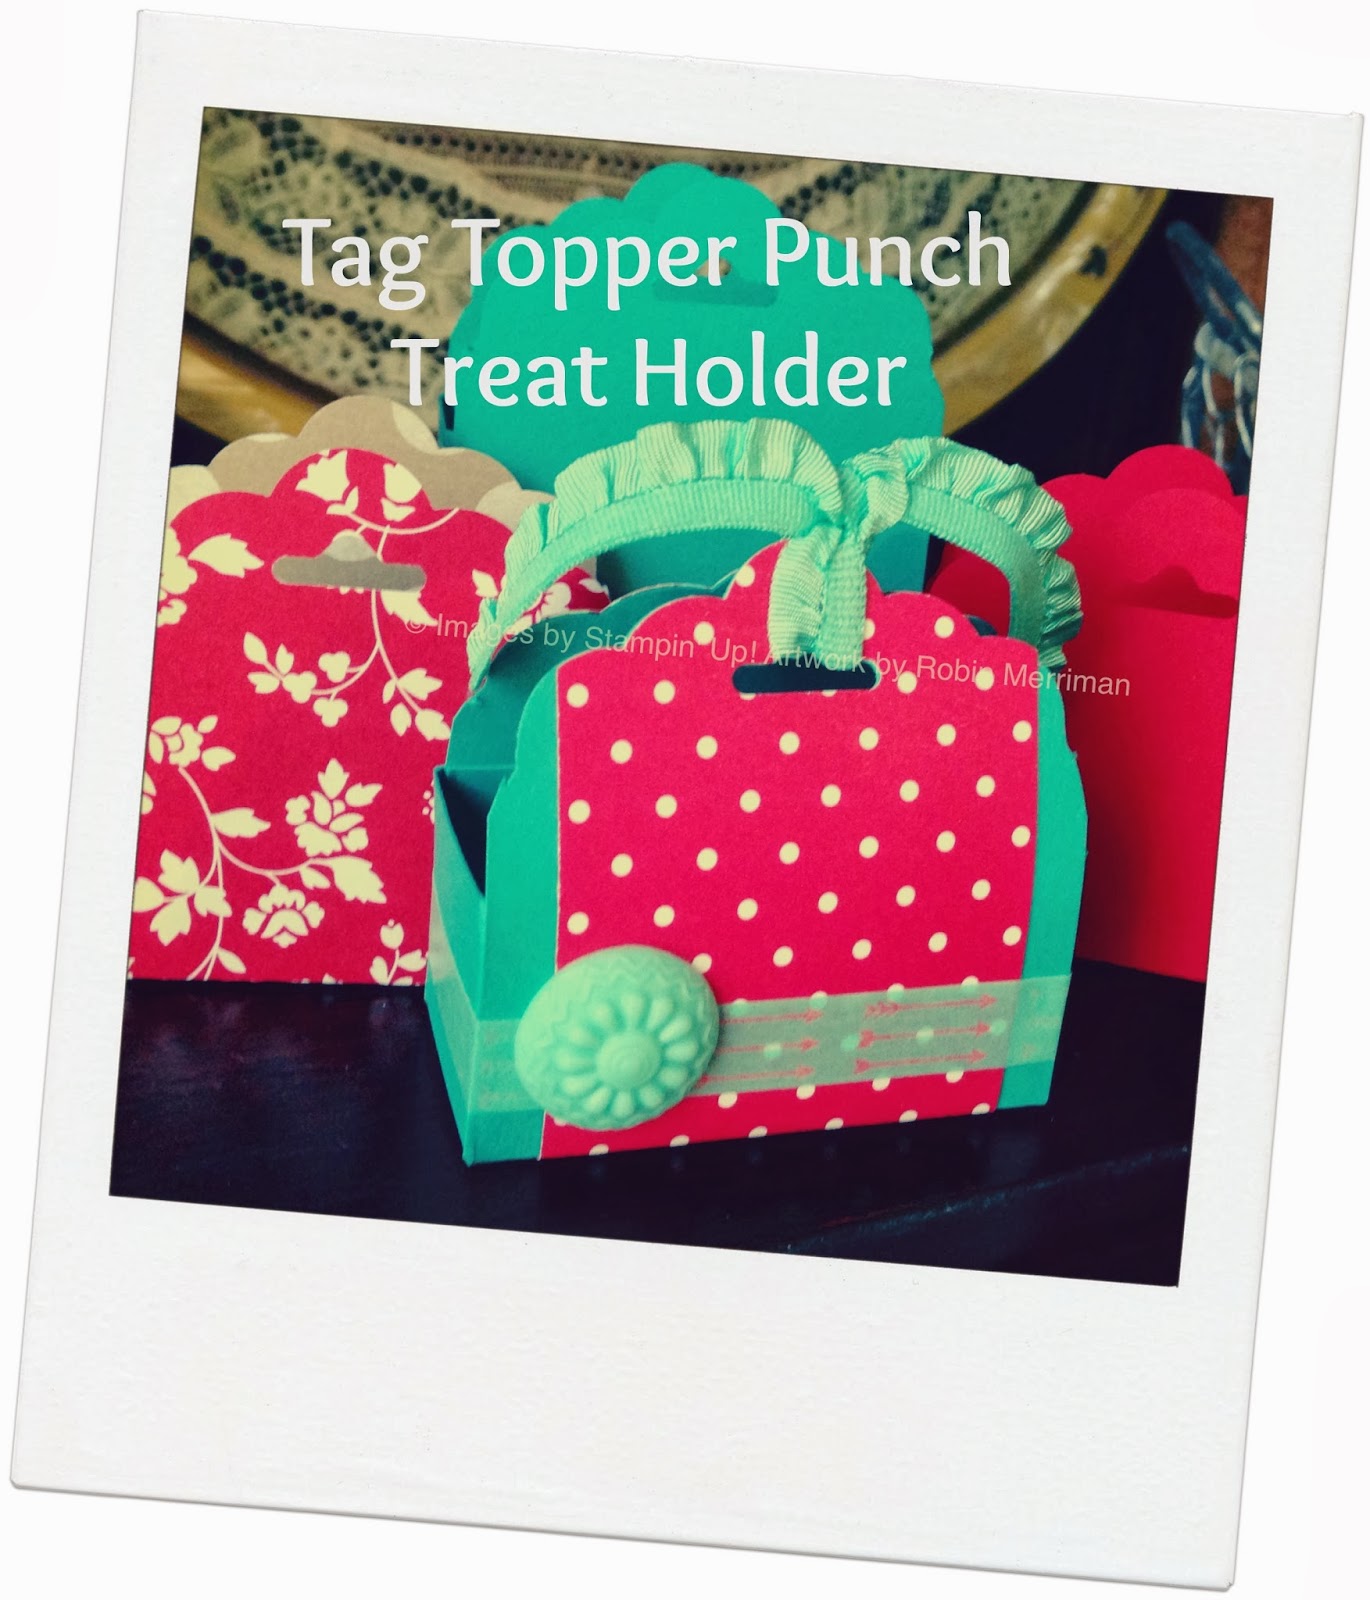 Scalloped Tag Punch Makes a Sweet Treat Holder